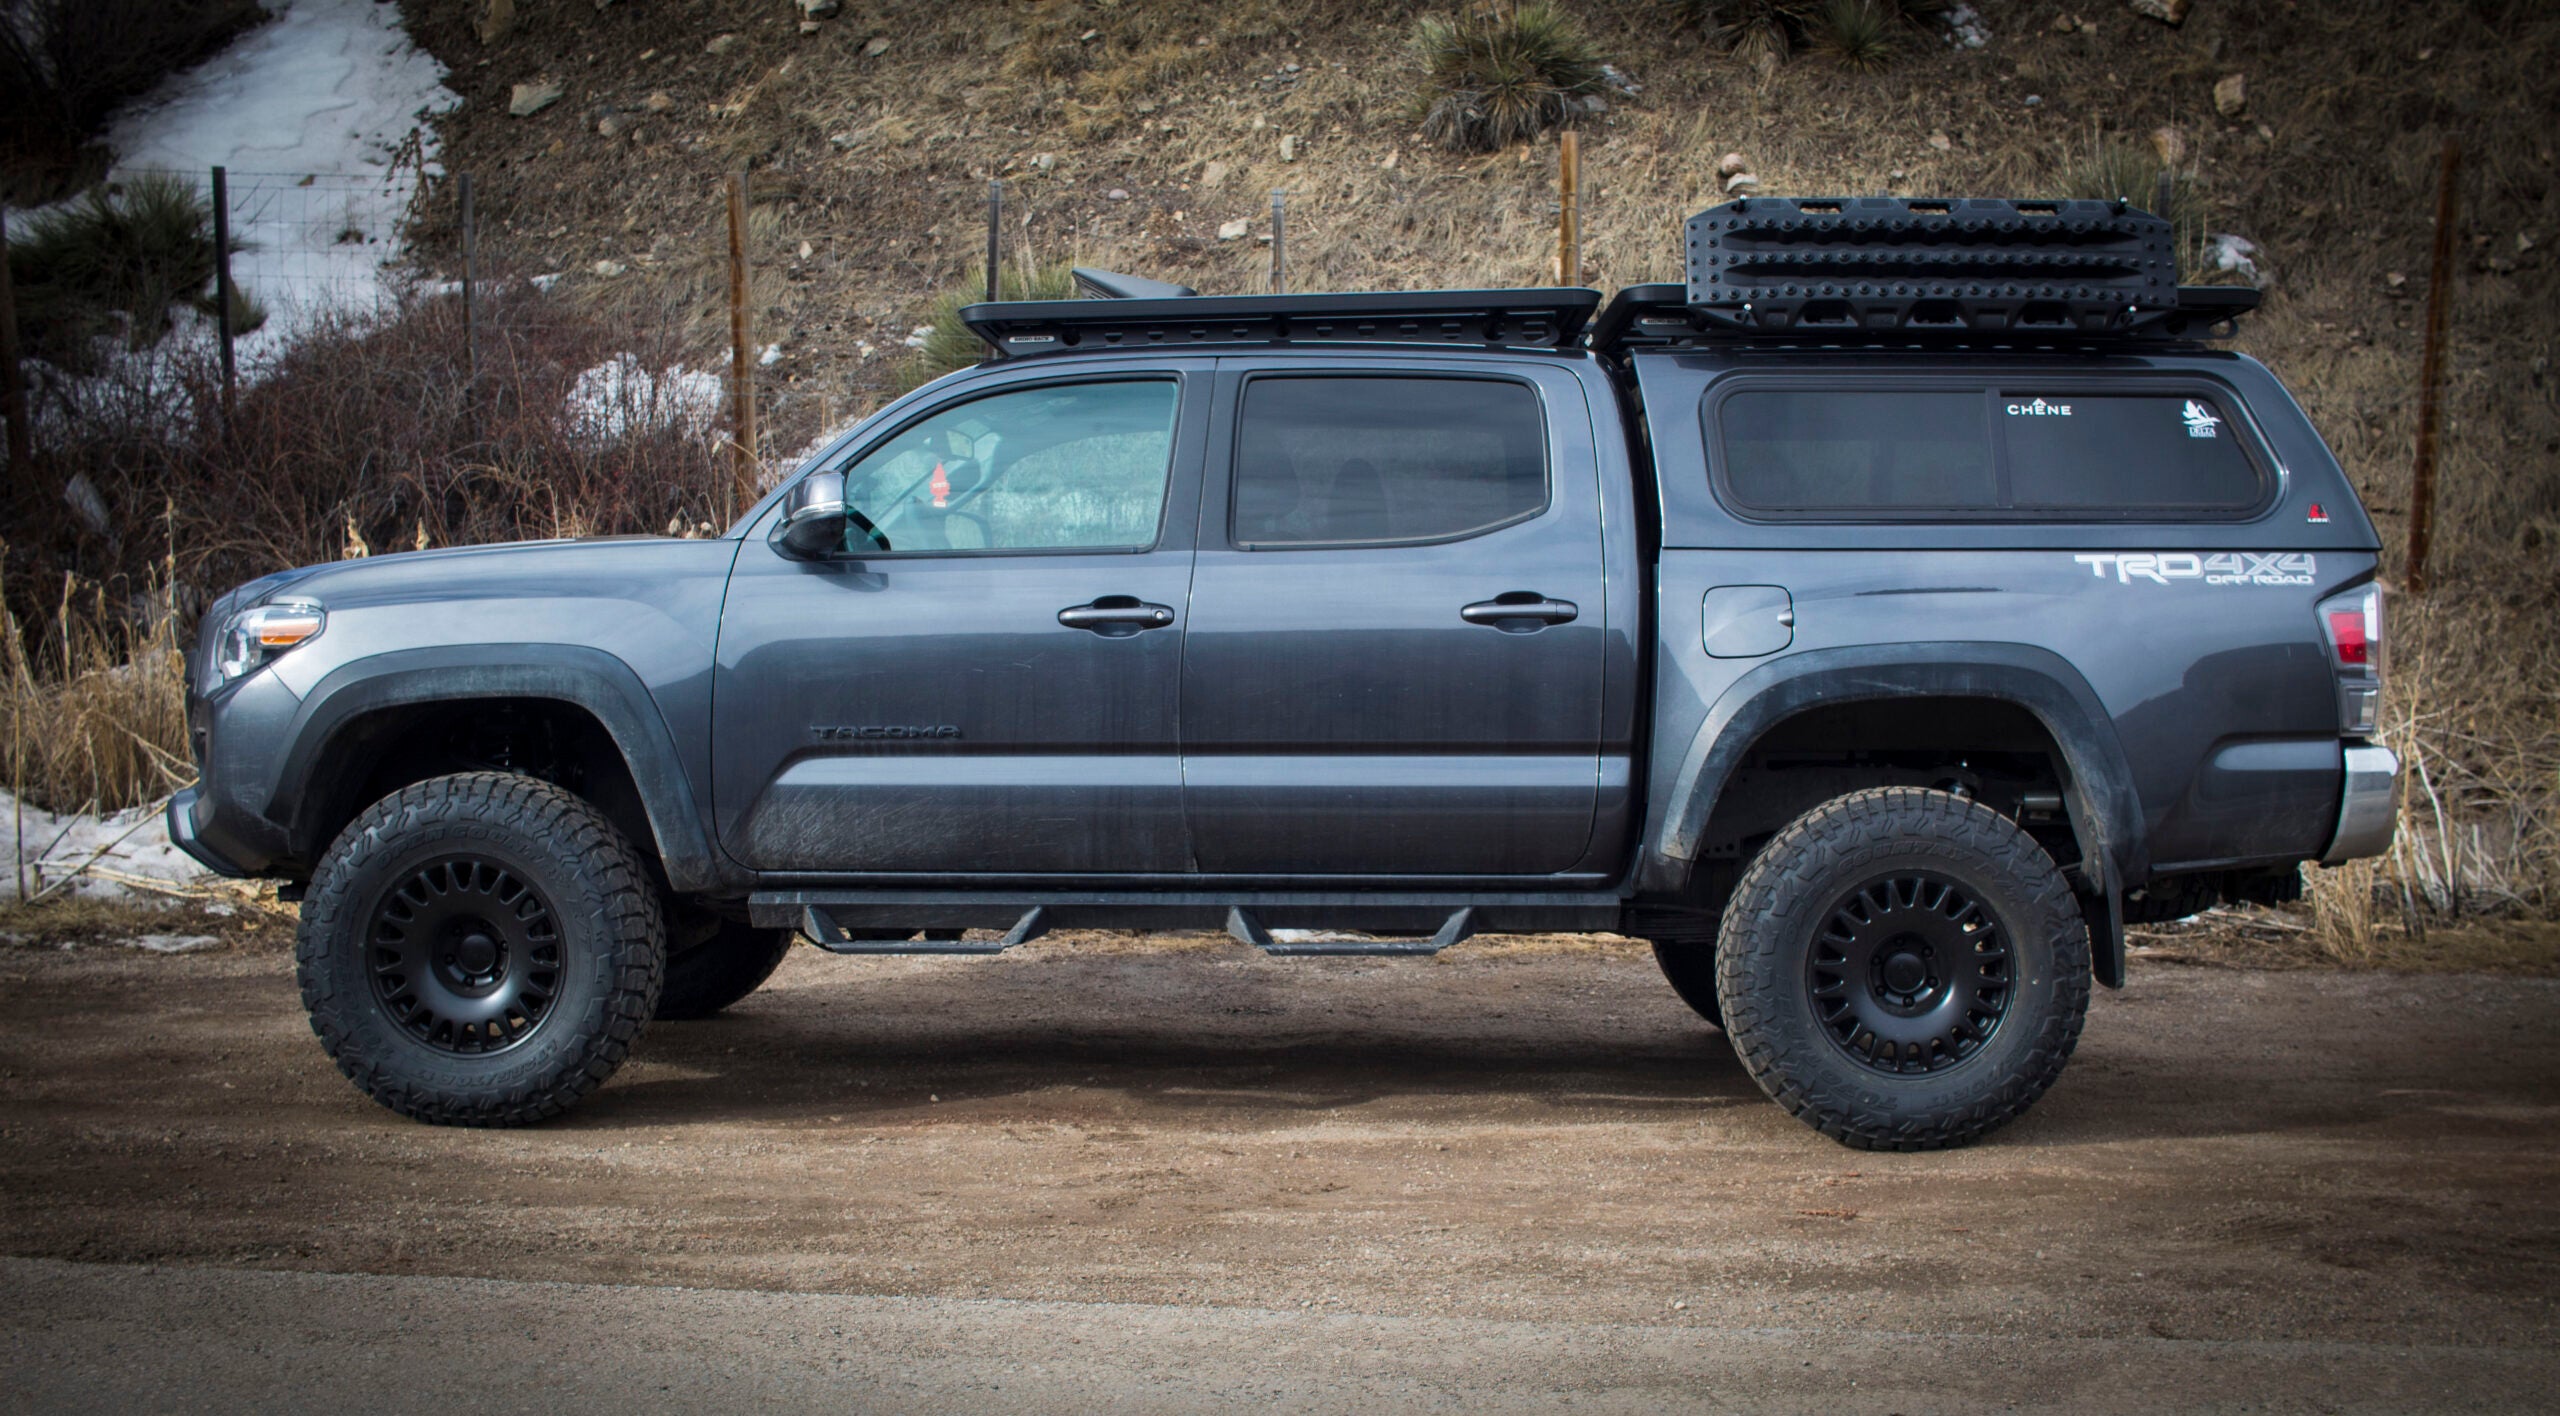 The most up to date version of the author's Toyota Tacoma TRD Off-Road.